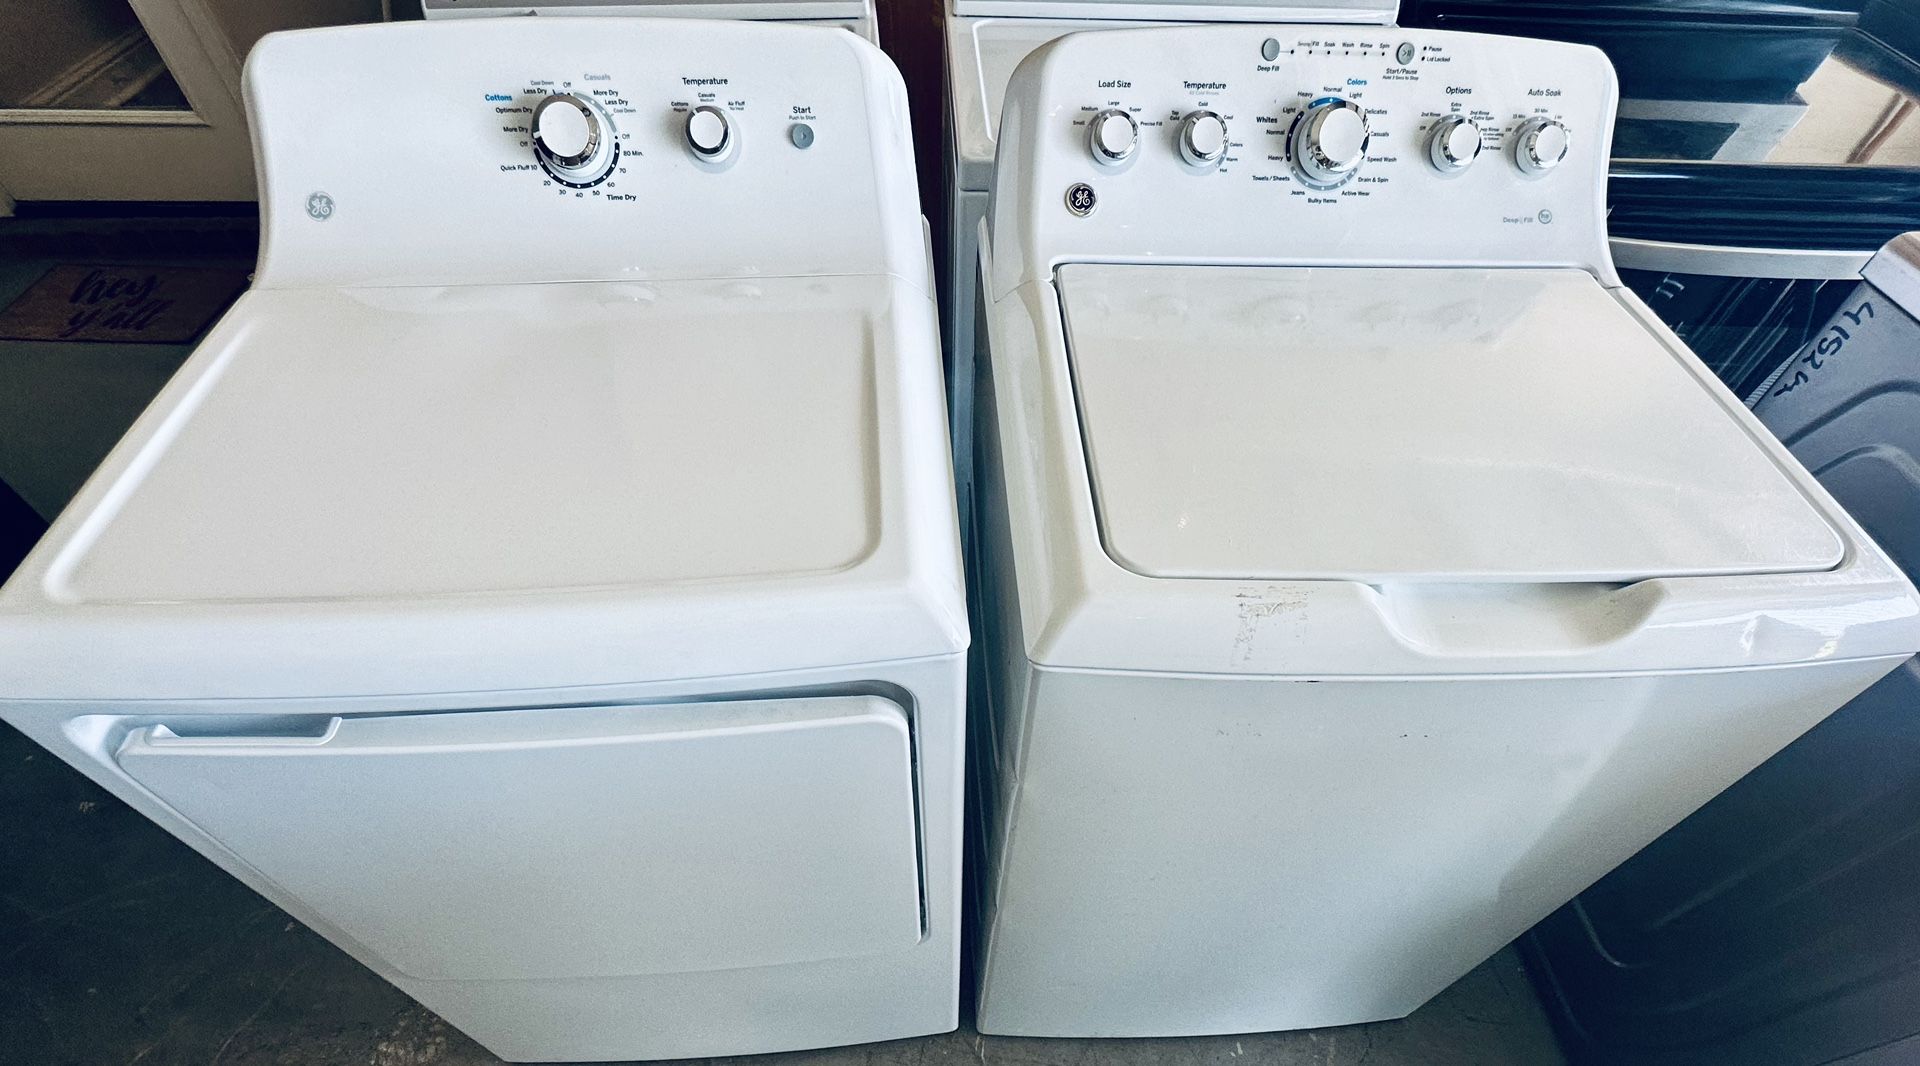 GE Washer And Dryer Set 